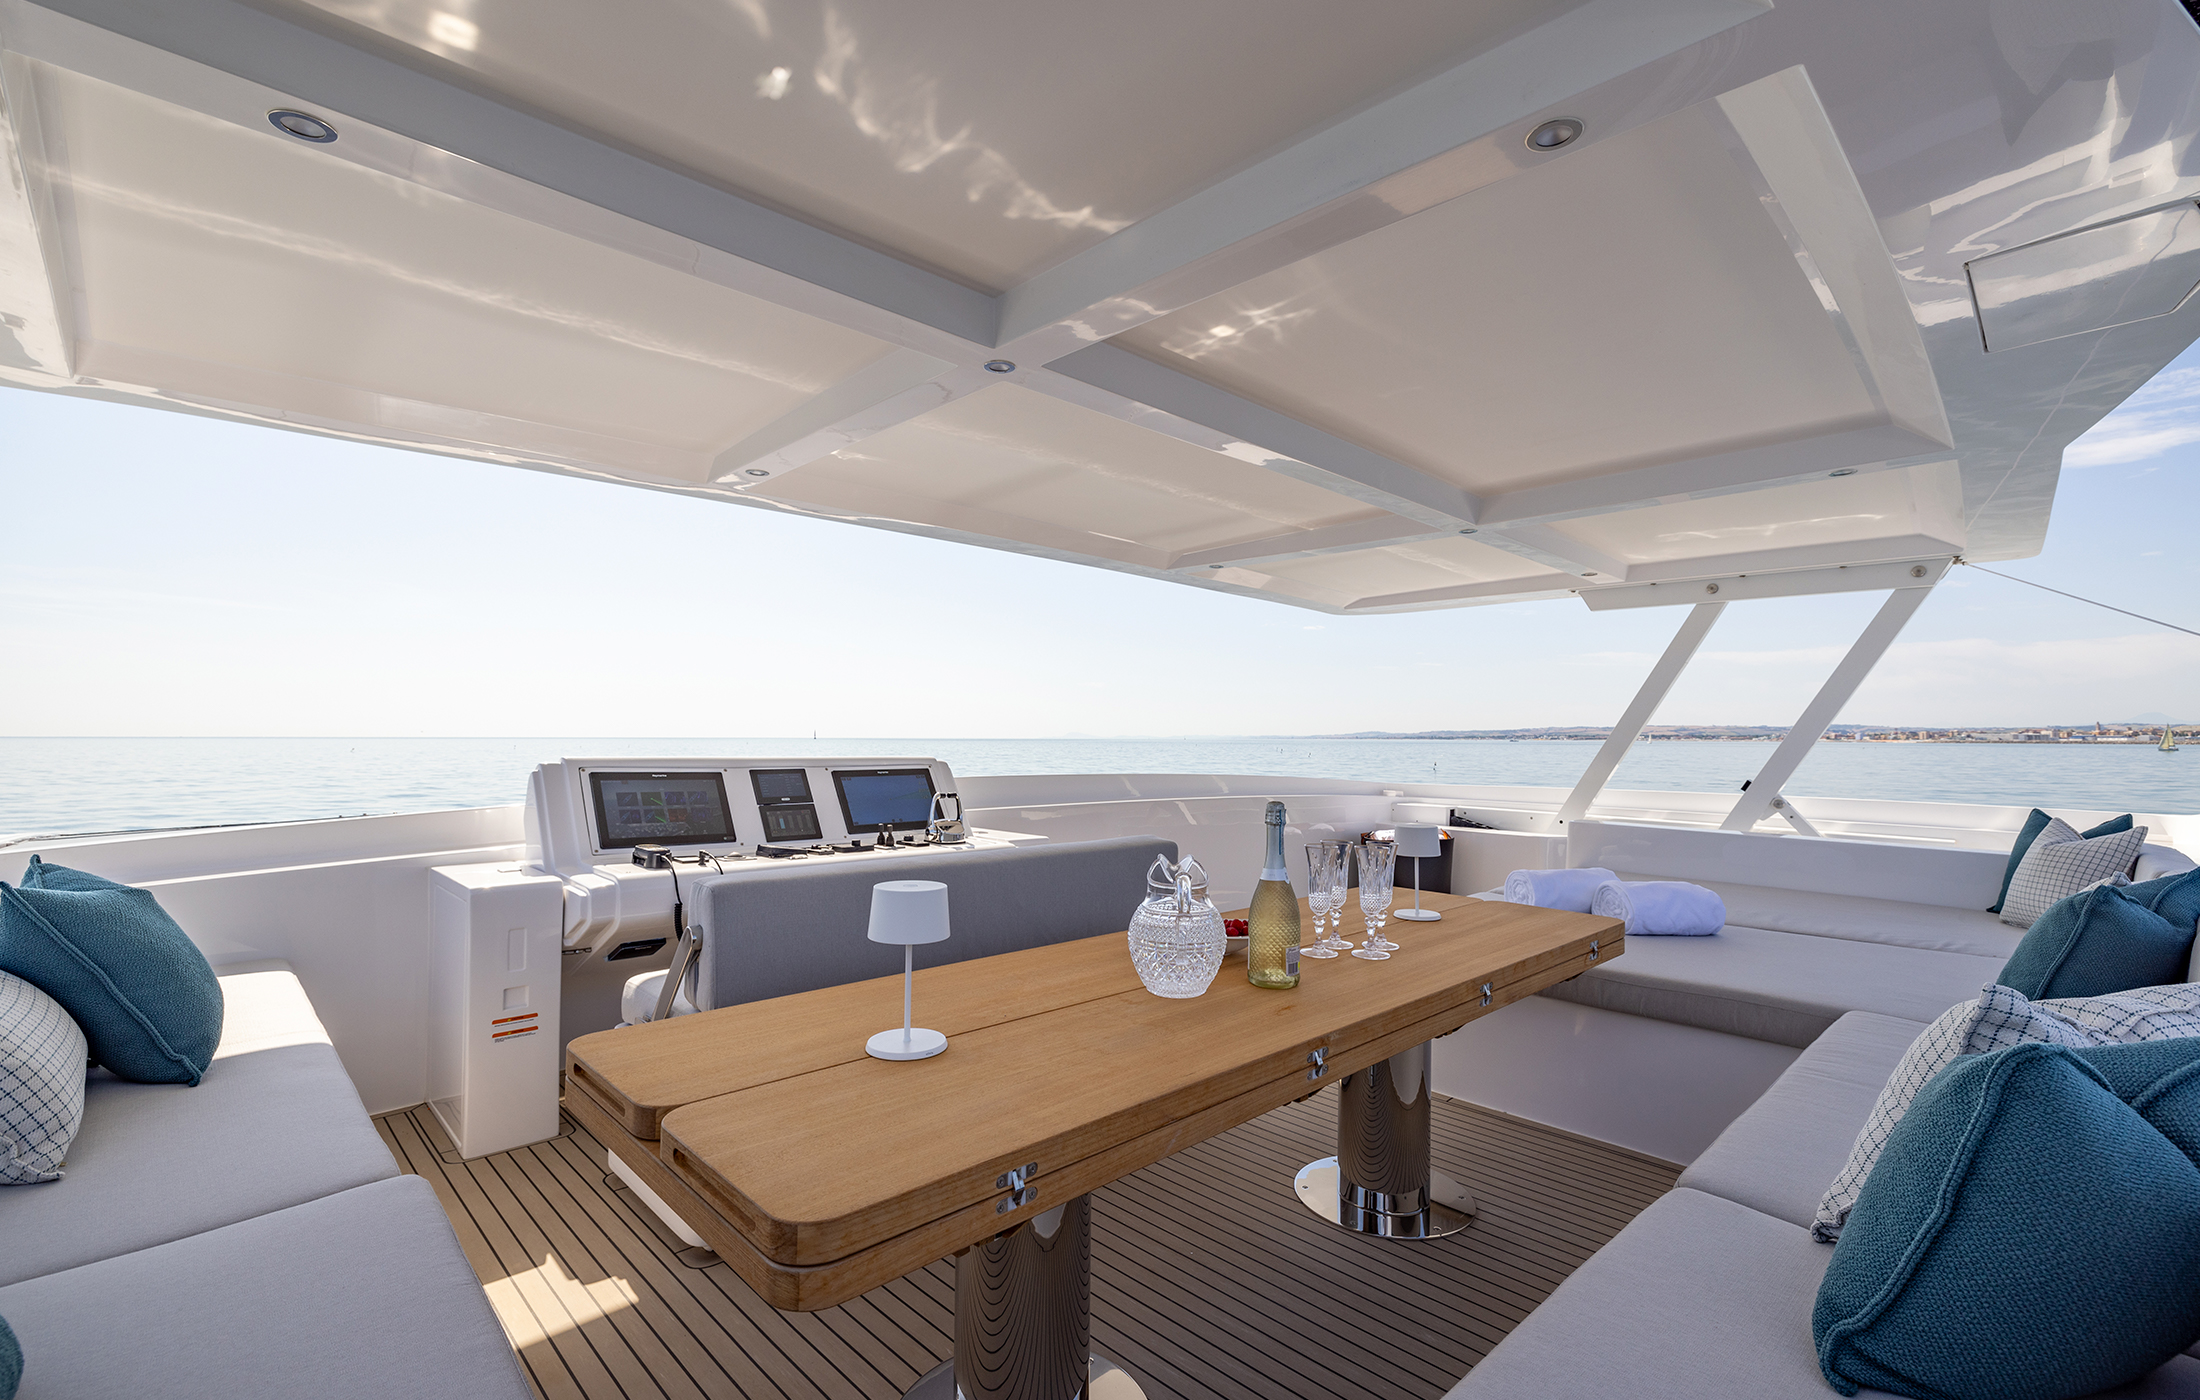 Control of the yacht in the flybridge